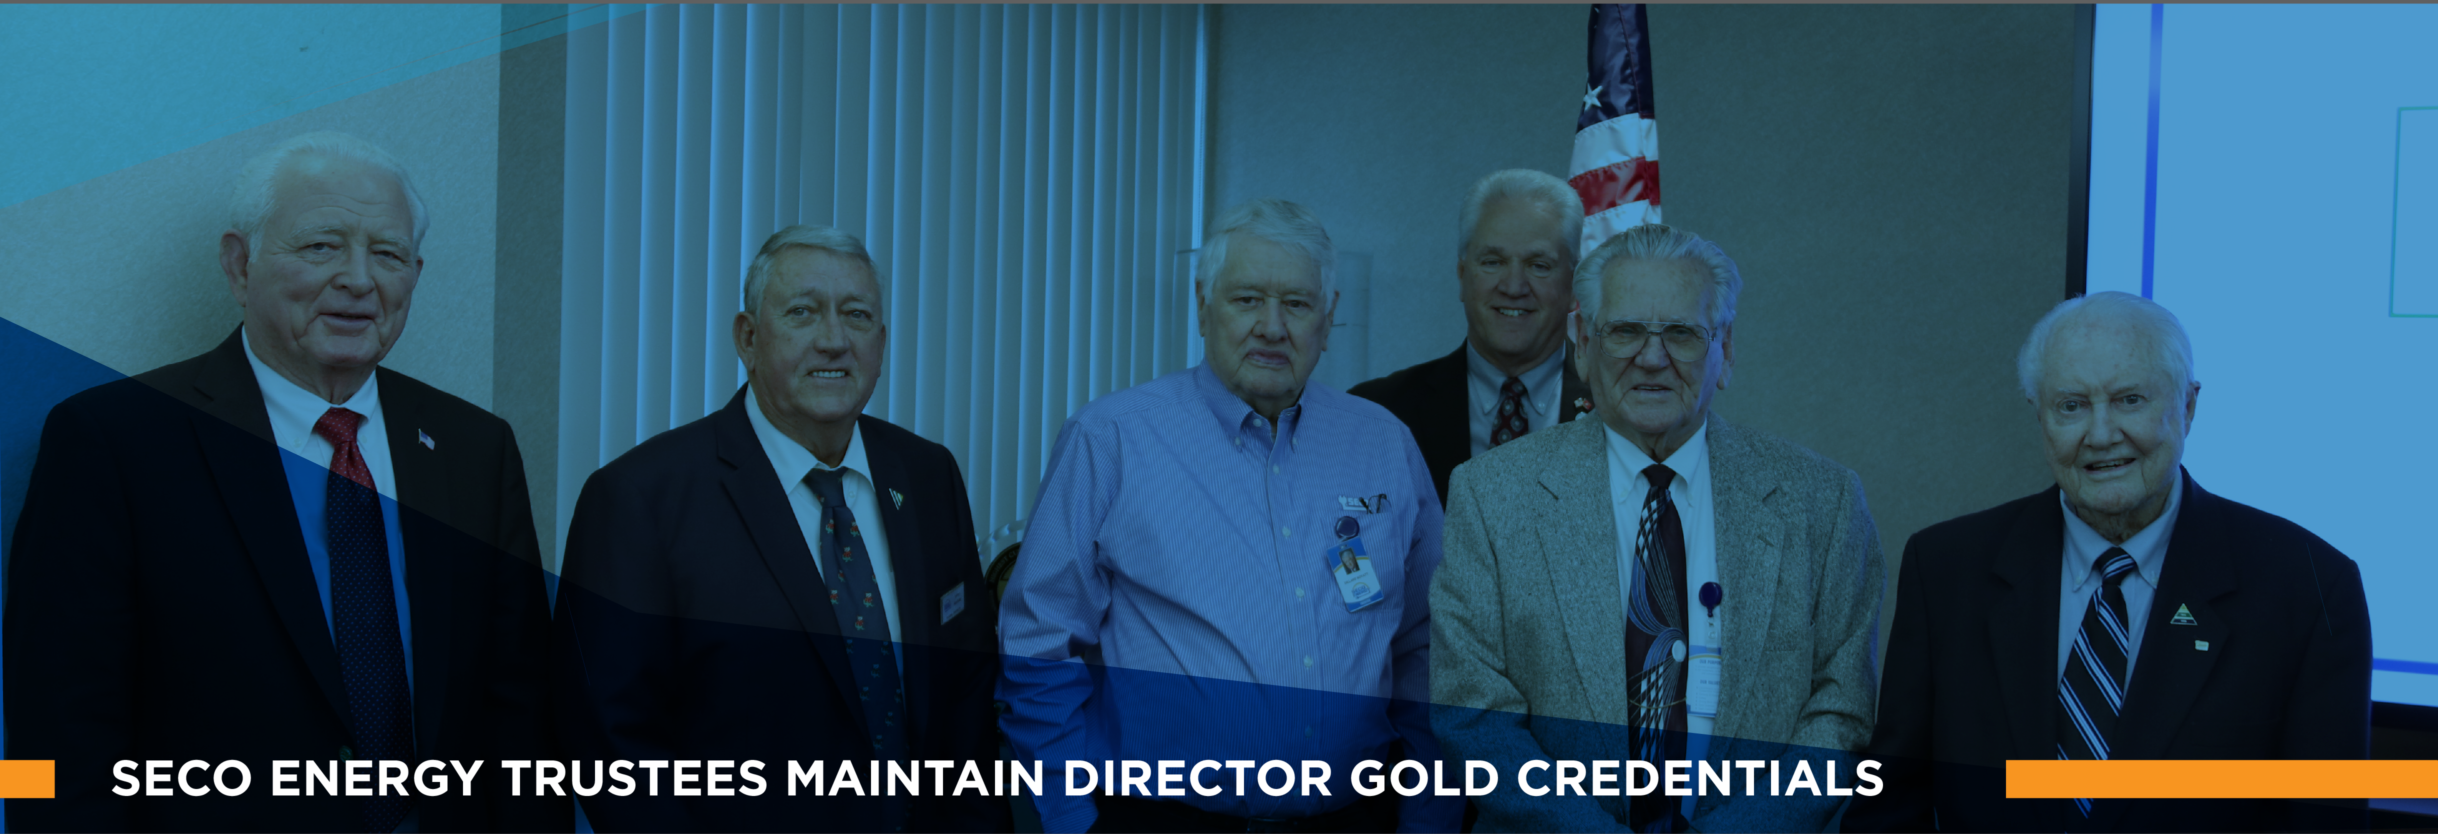 SECO Energy Trustees Maintain Director Gold Credentials